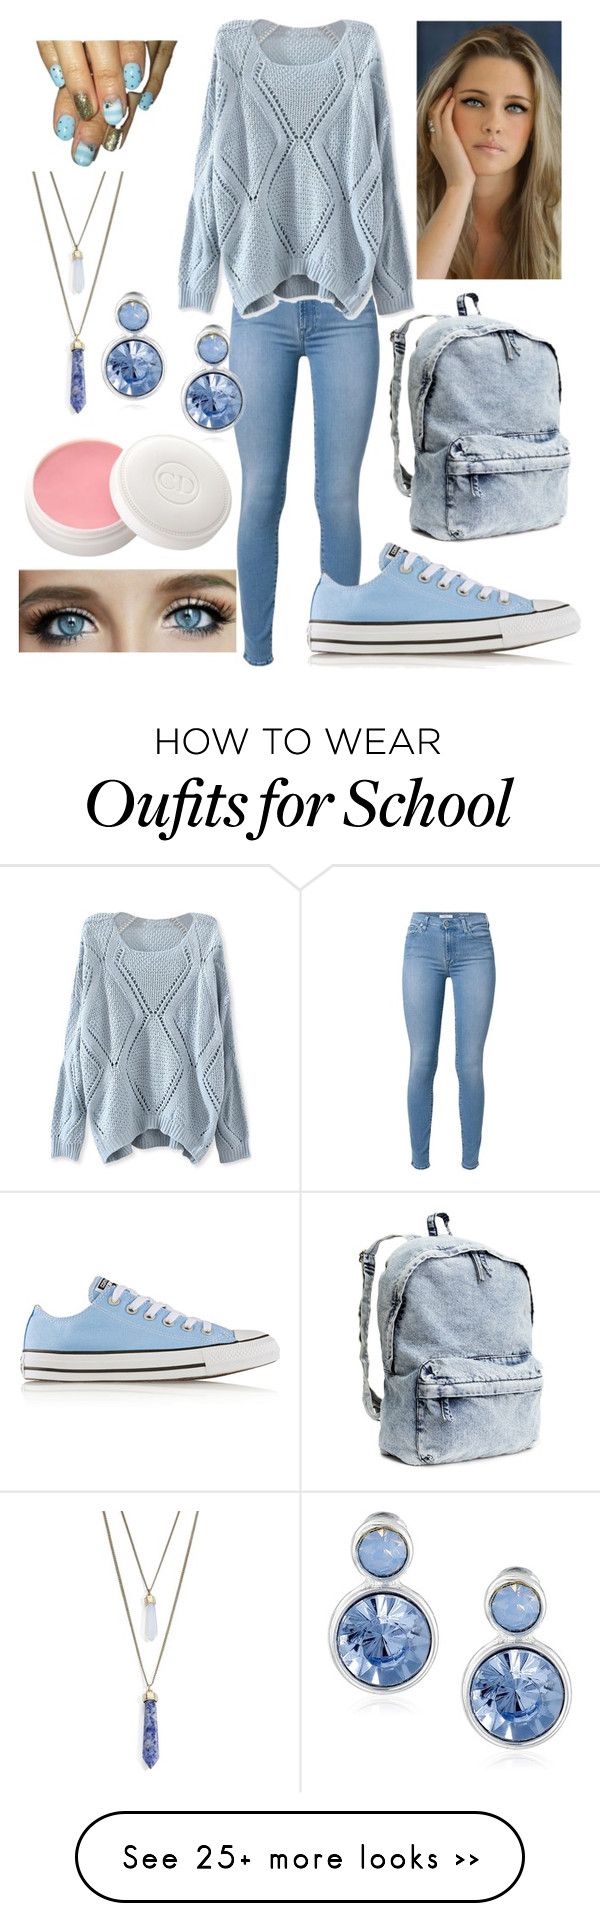 Polyvore Outfit Idea for School